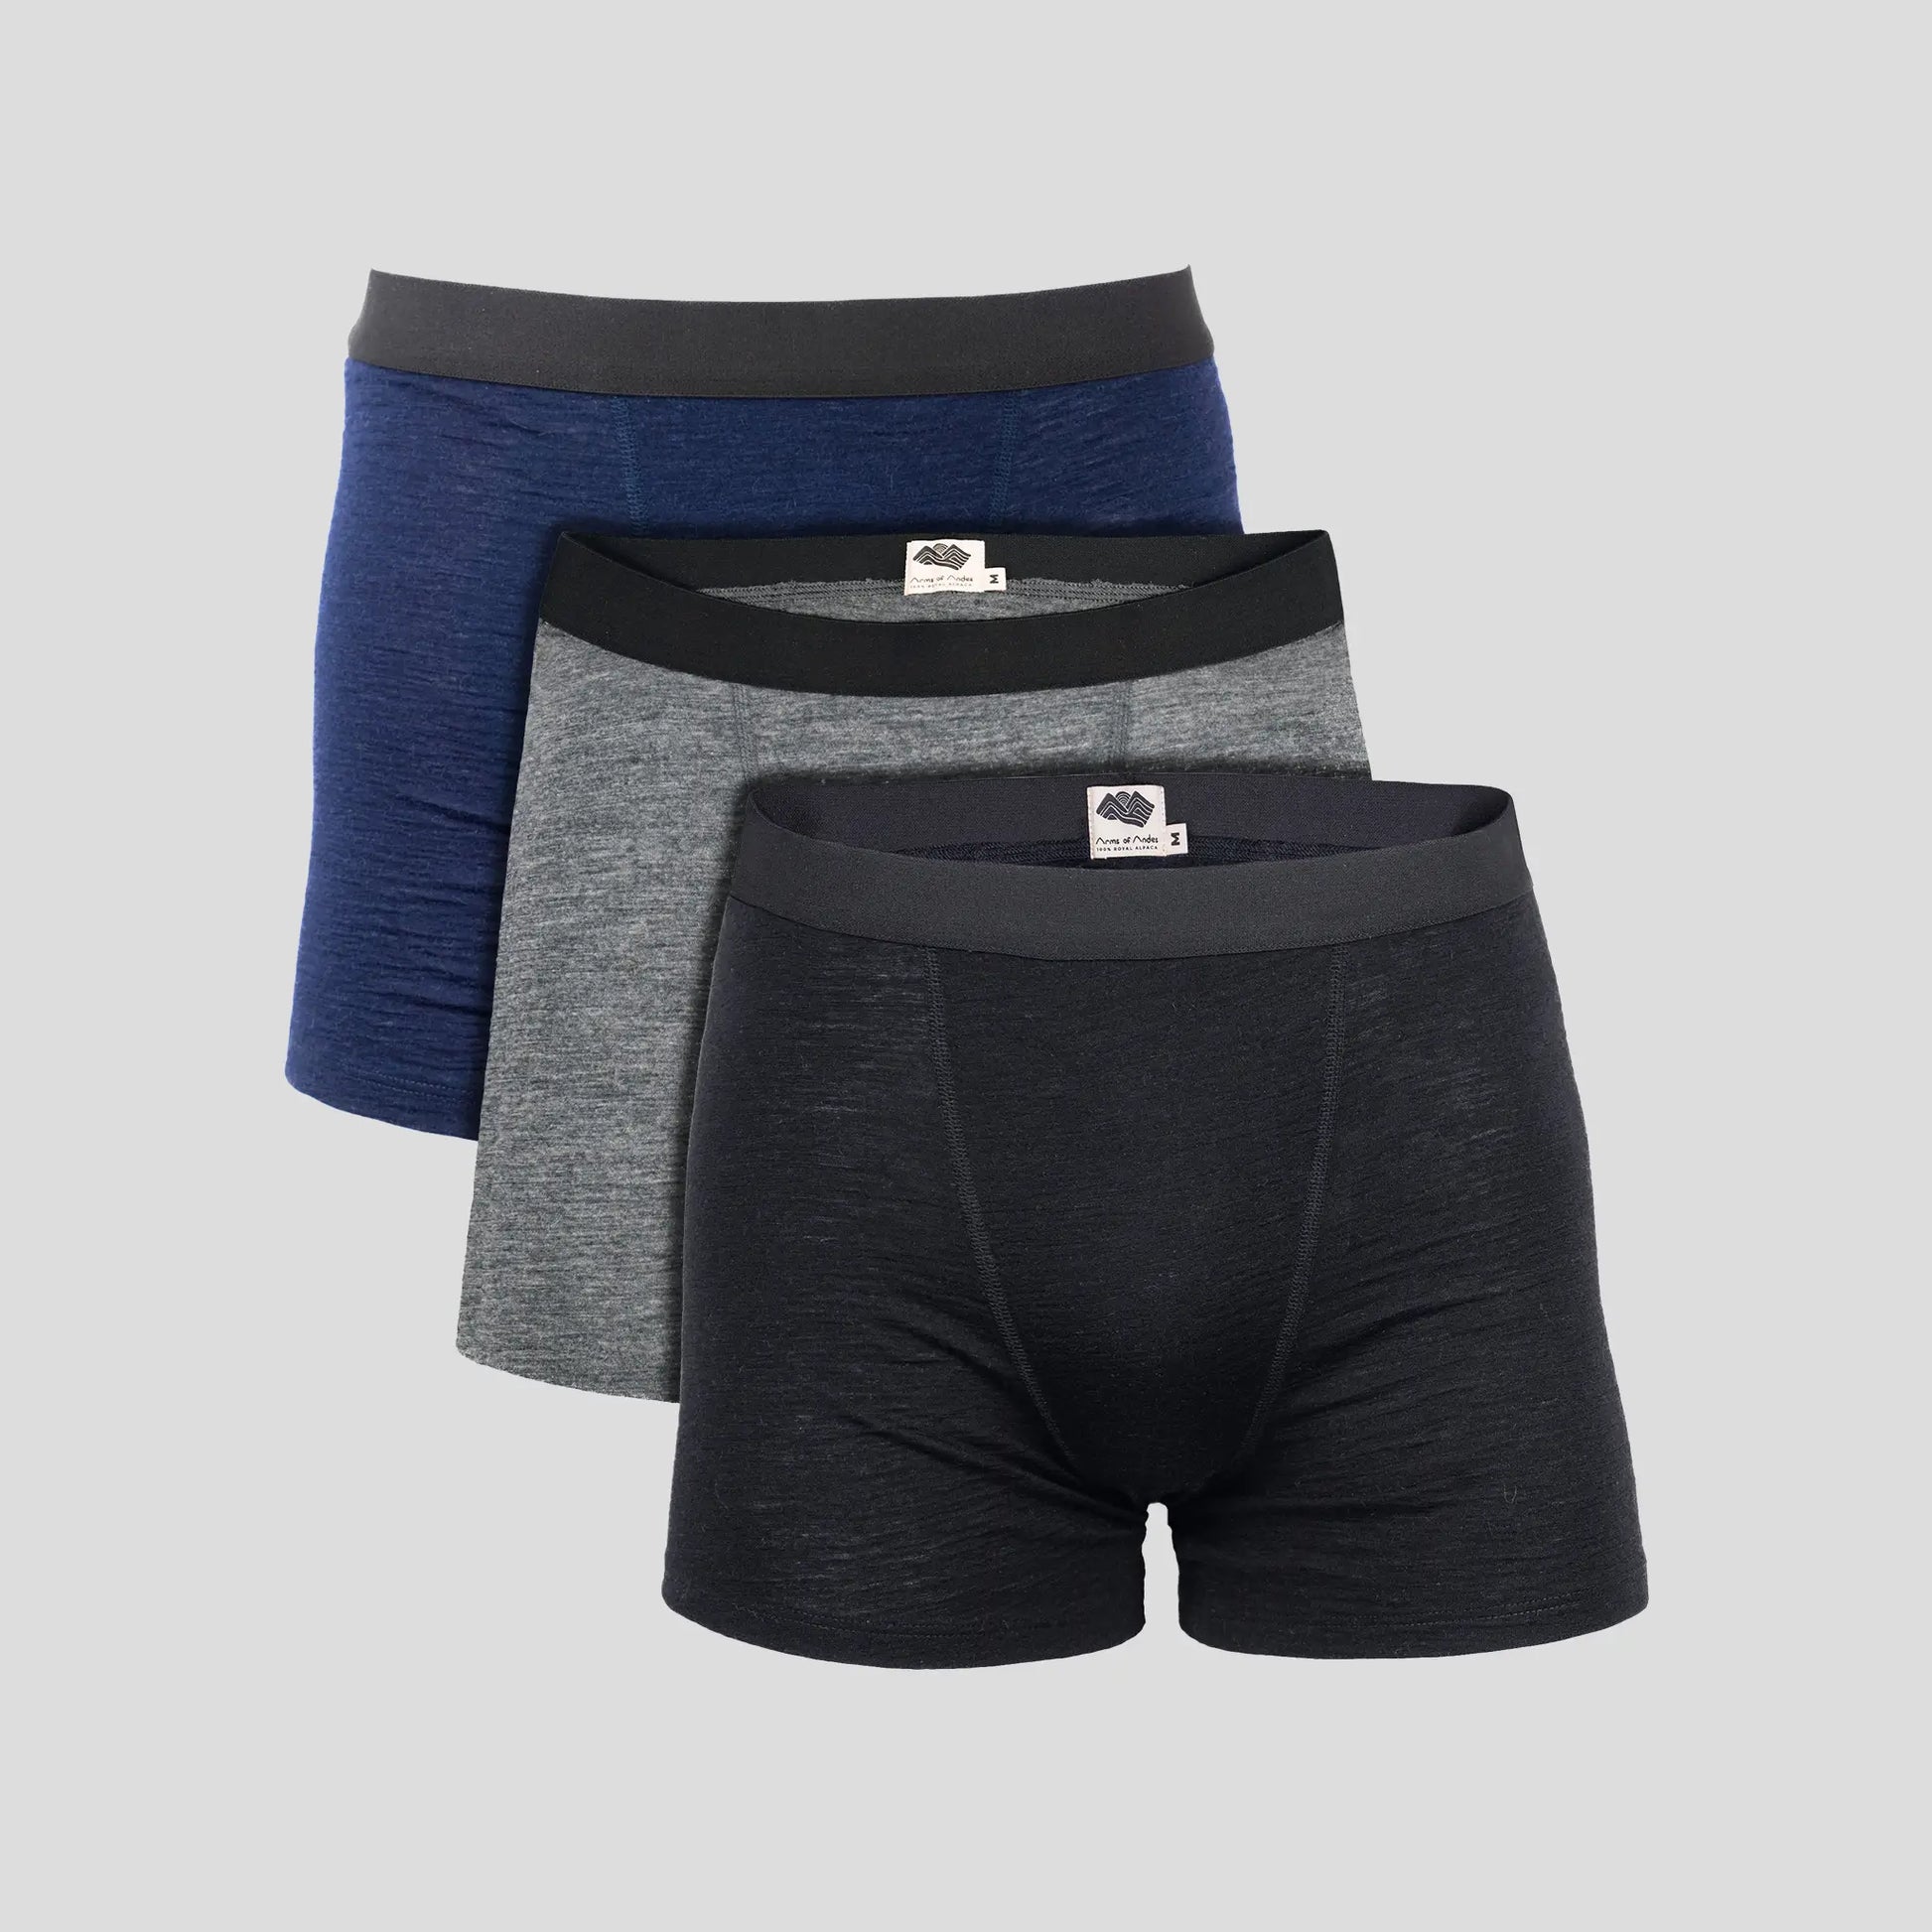 Men's Organic Cotton Boxers Triple Pack in Black/charcoal/grey